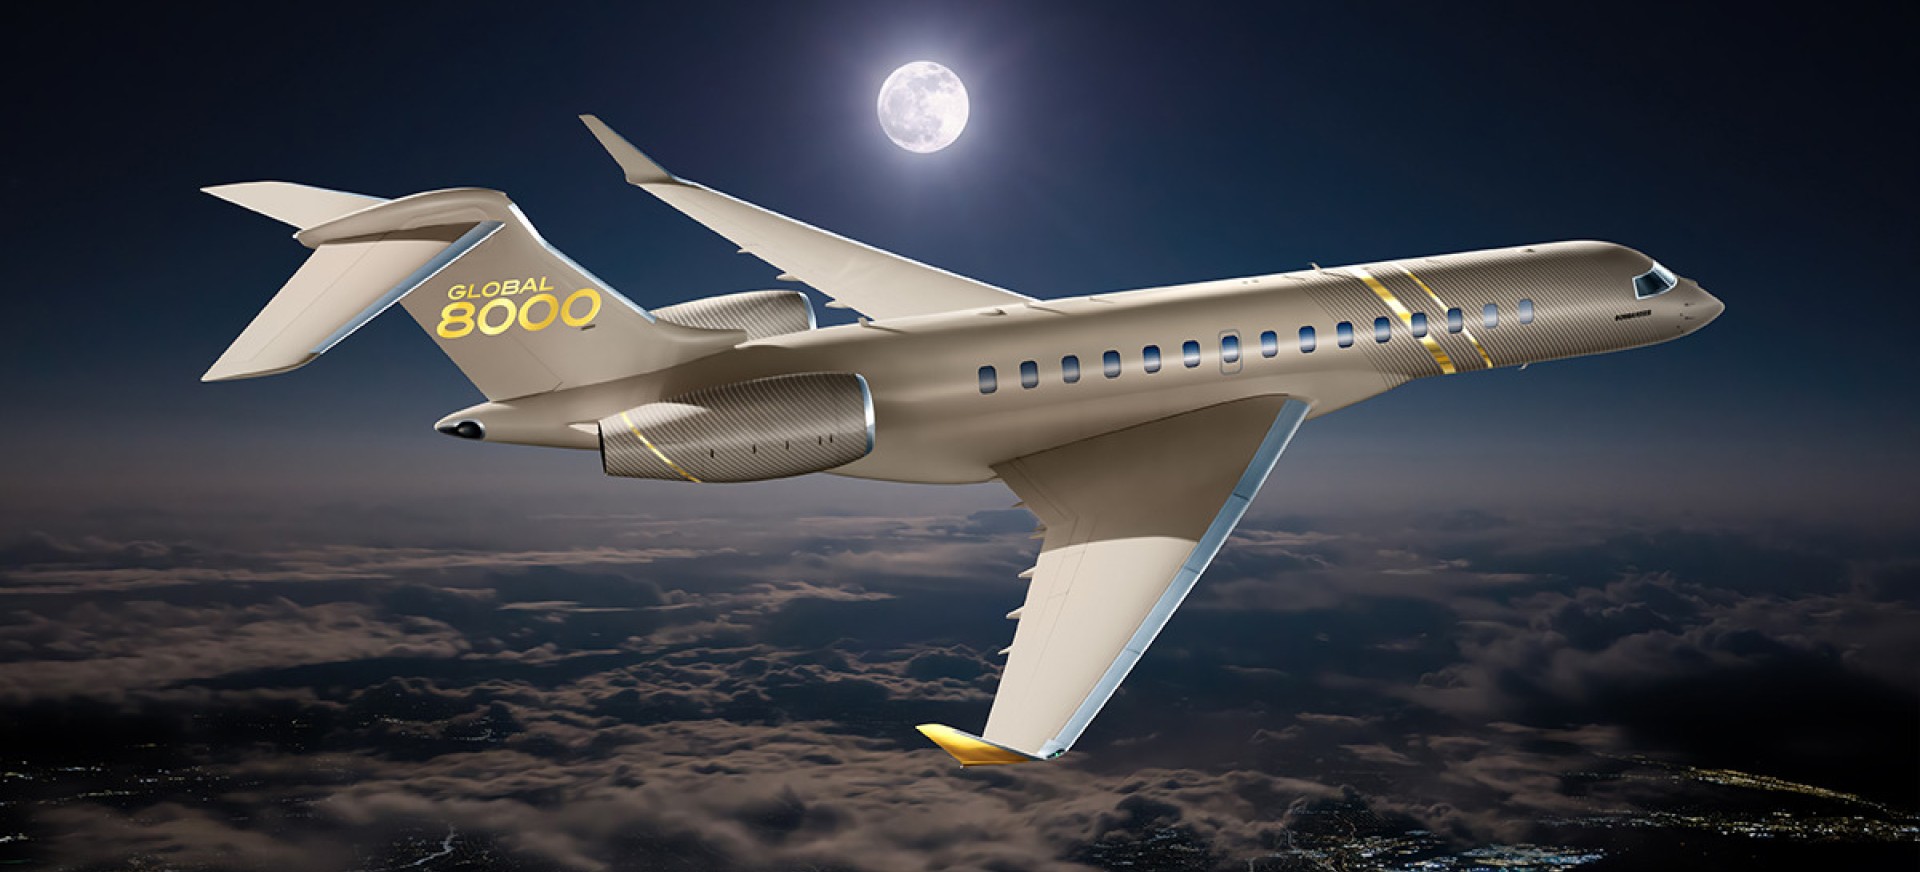 Global 8000 flying at night